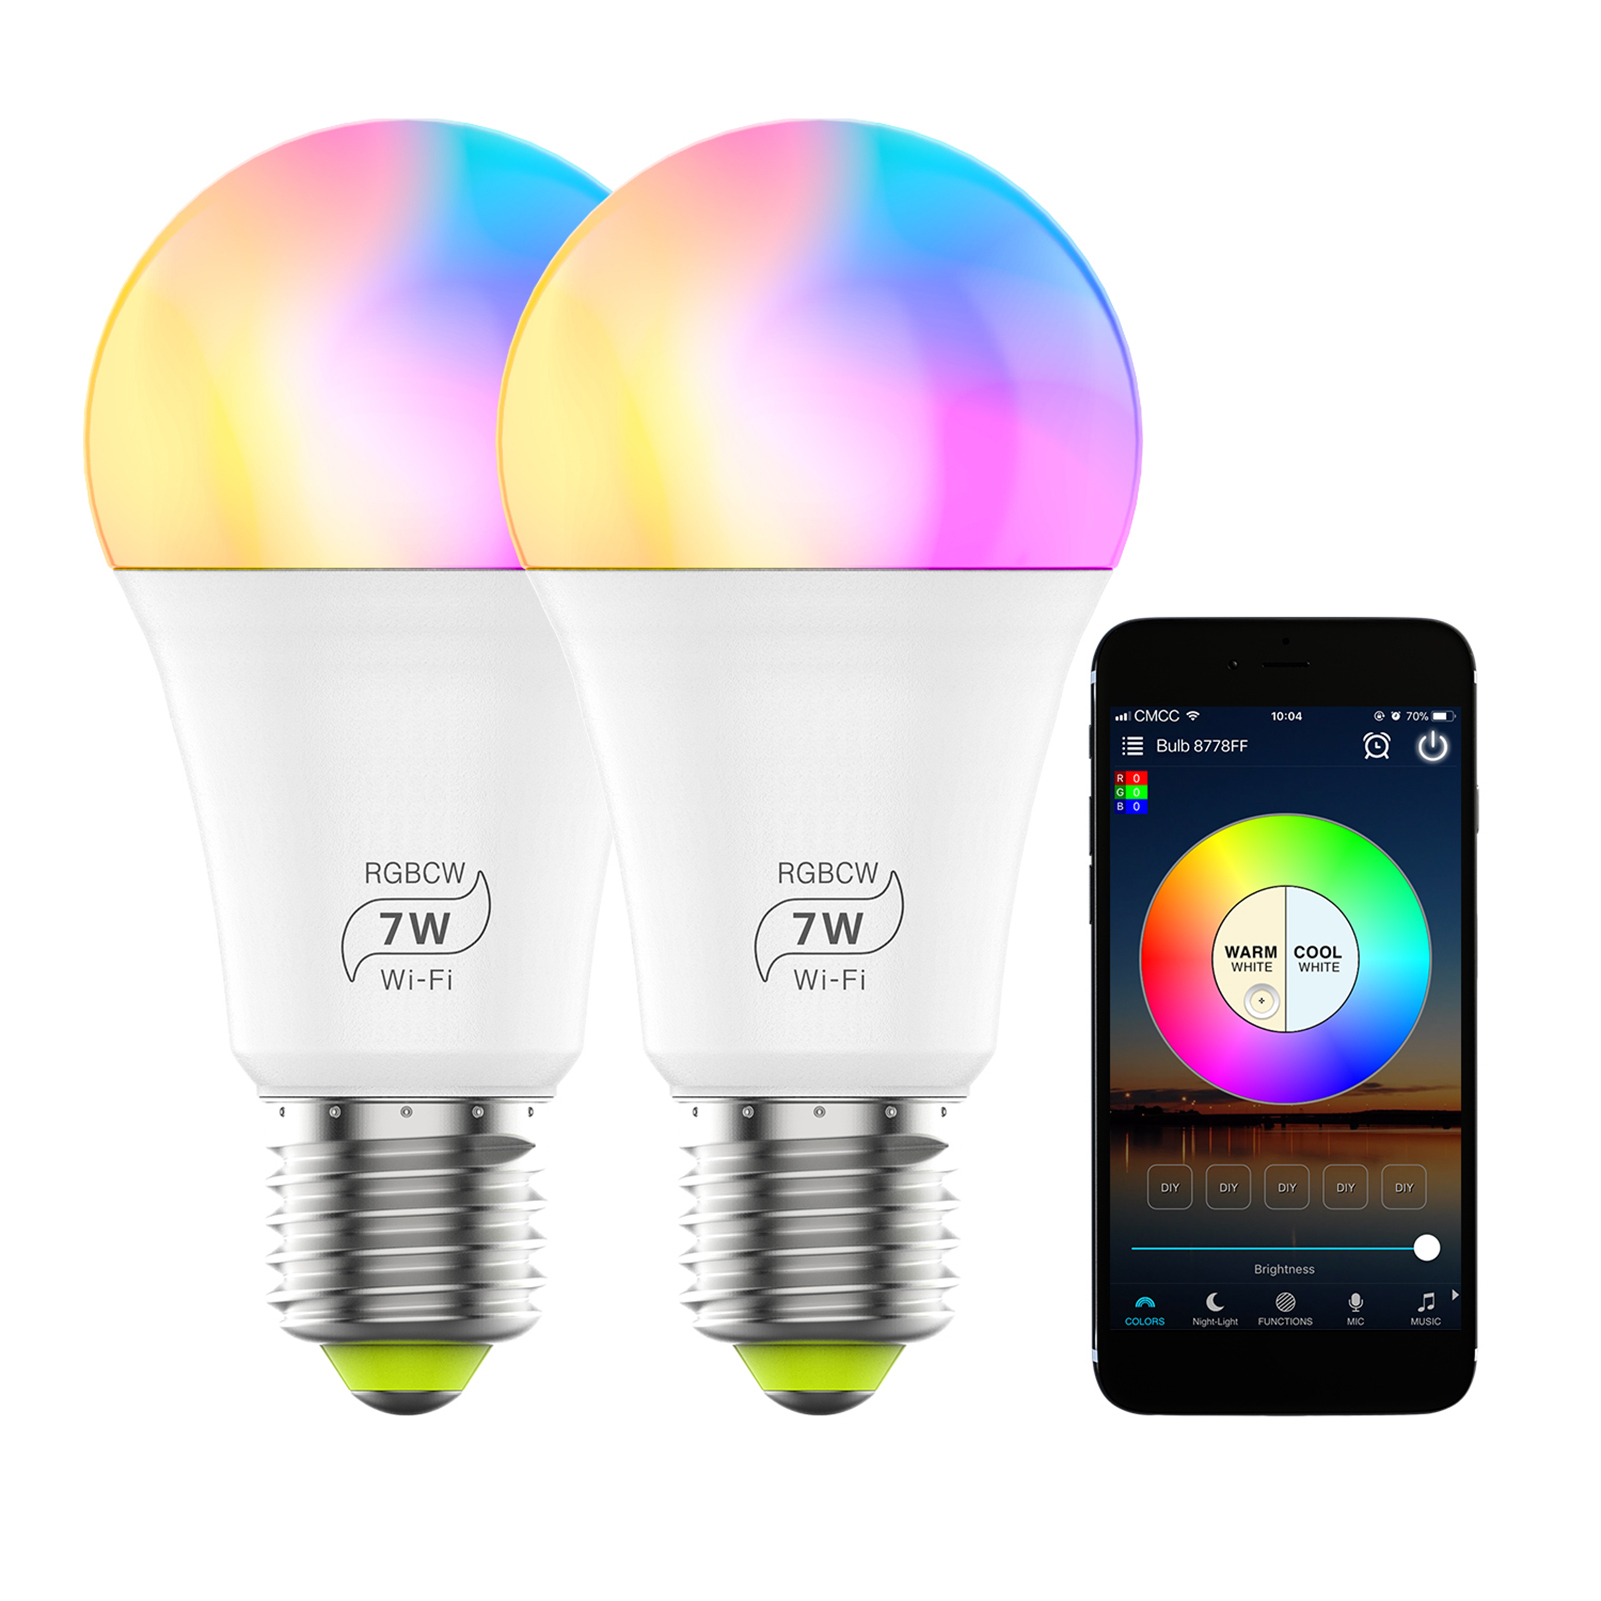 Led connect. Light Bulb Smart led Color Dimmable changing WIFI Music sync RGB Home Bulbs Lights Control White. Led Bulb. Nature connect led.